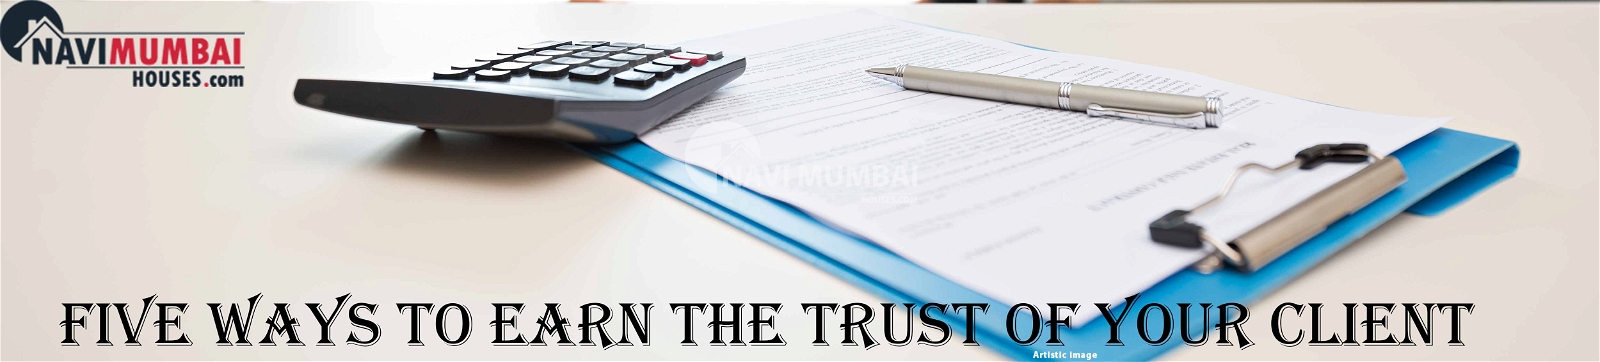 Five ways to earn the trust of your Client